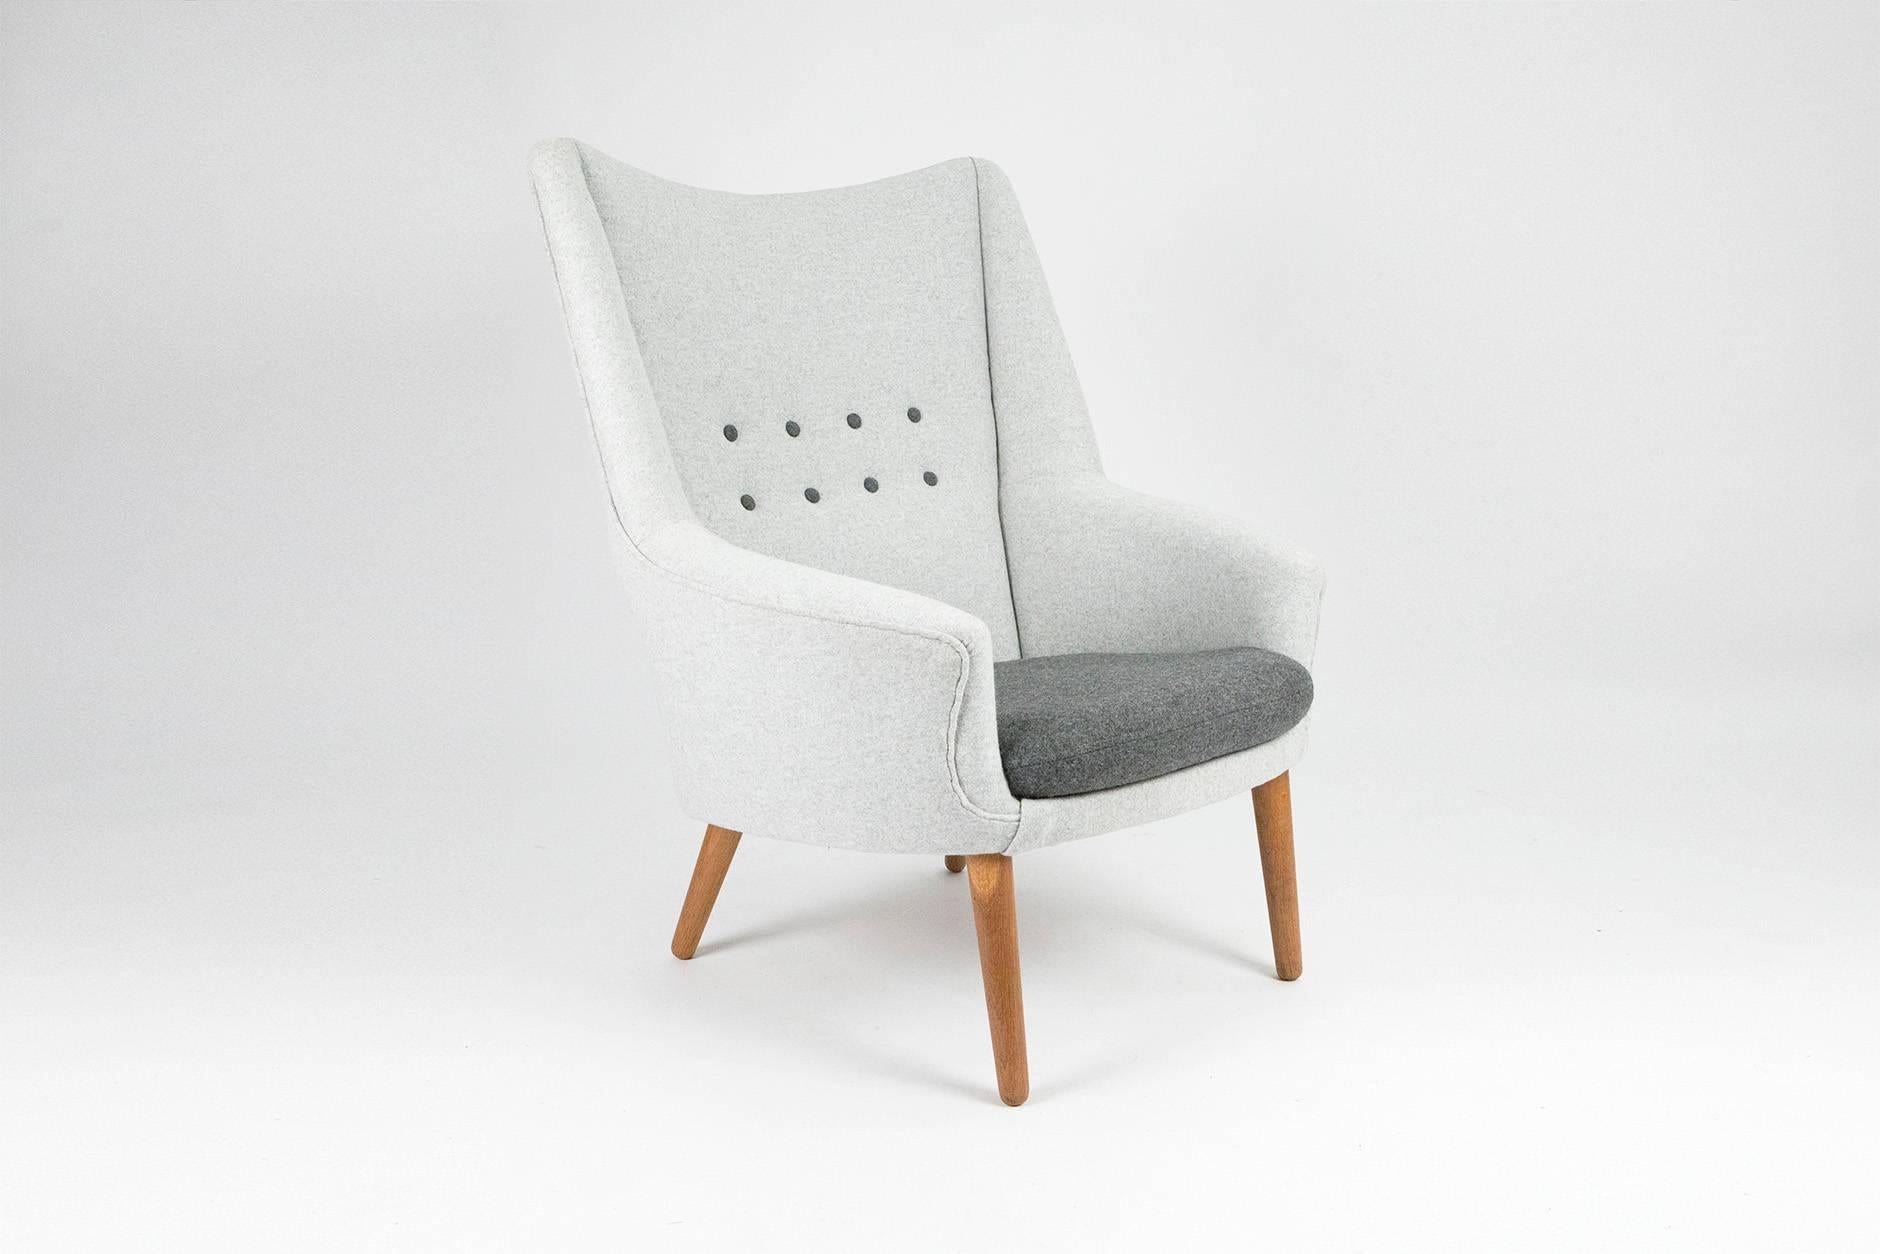 Produced by Rolschau Møbler, Denmark. Oak legs, seat and loose seat cushion reupholstered in contrasting Kvadrat Divina wool felt.

Presented at the exhibition: 